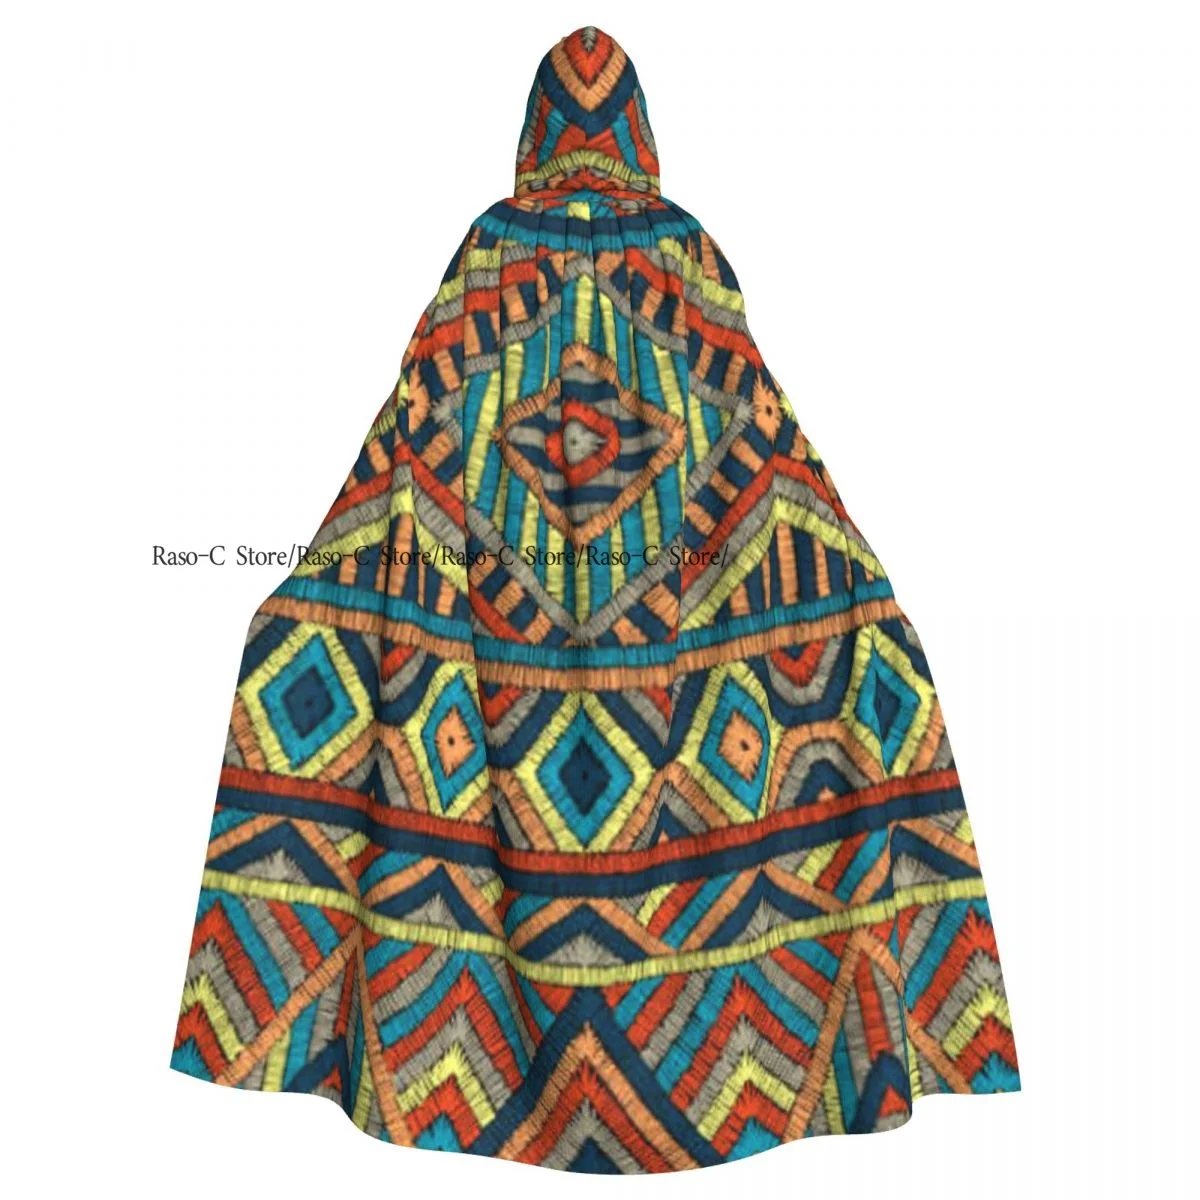 

Unisex Witch Party Reversible Hooded Adult Vampires Cape Cloak Geometric Colorful Ethnic Tribal Motifs